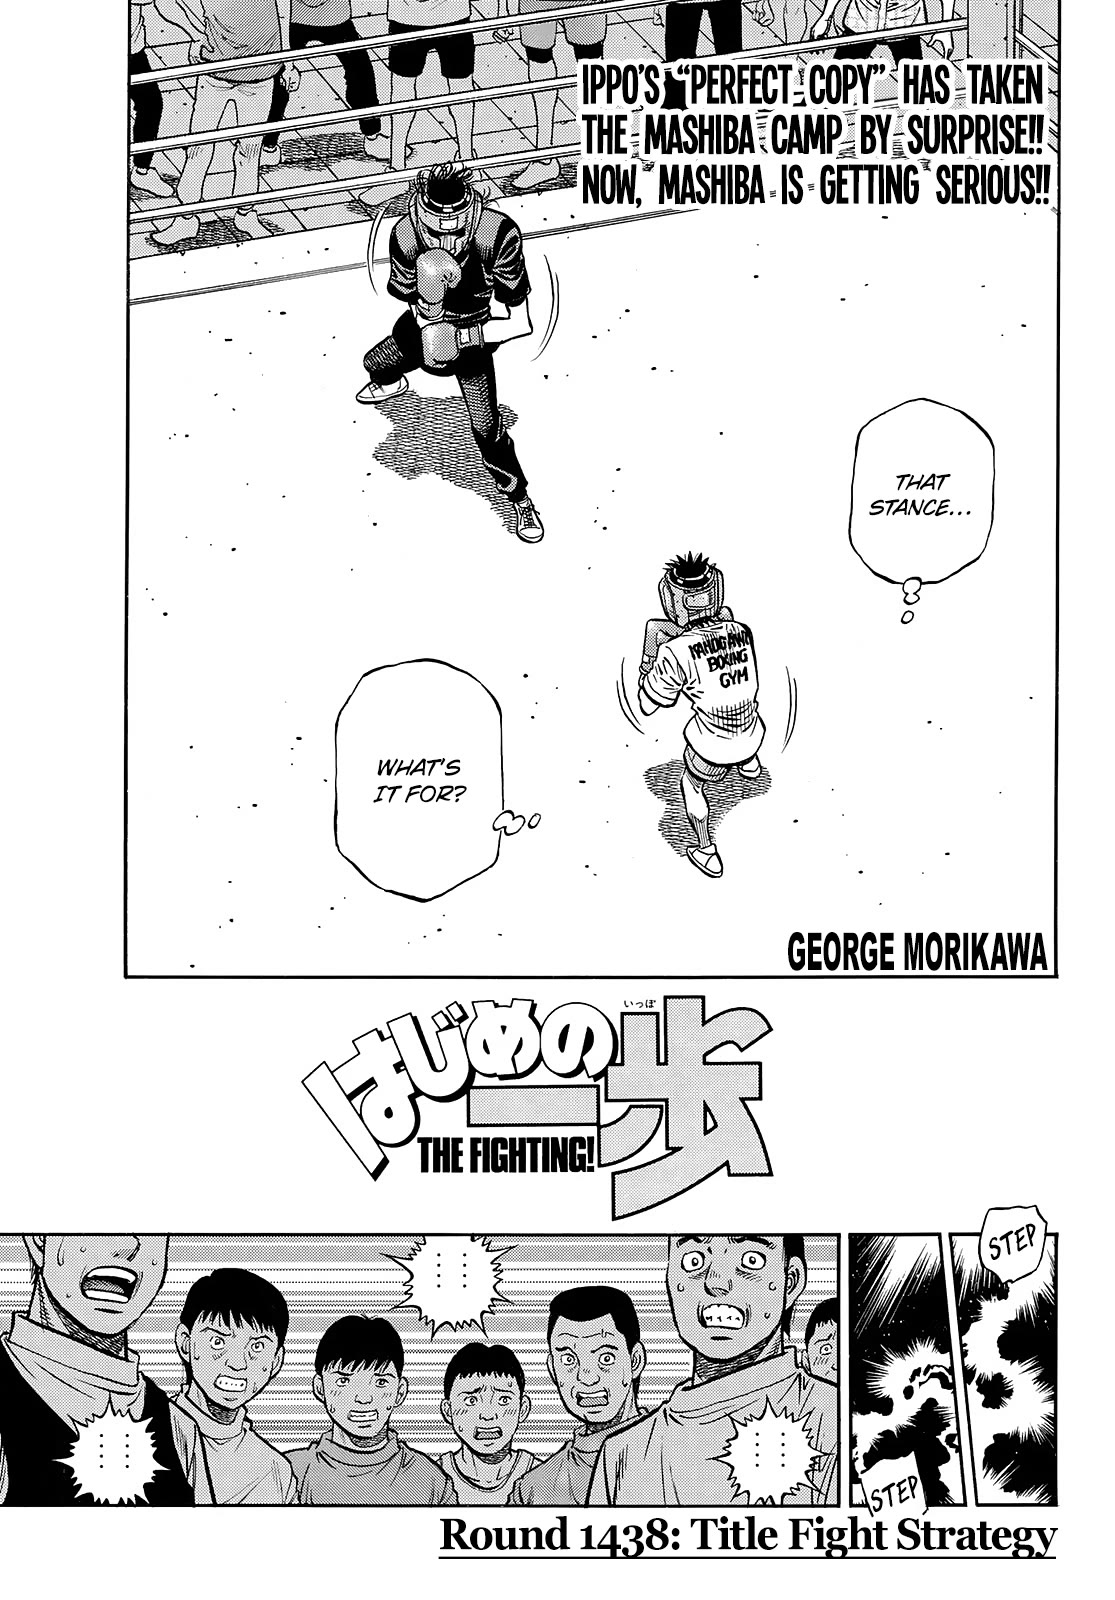 Hajime no Ippo, Chapter 1438 Title Fight Strategy image 2